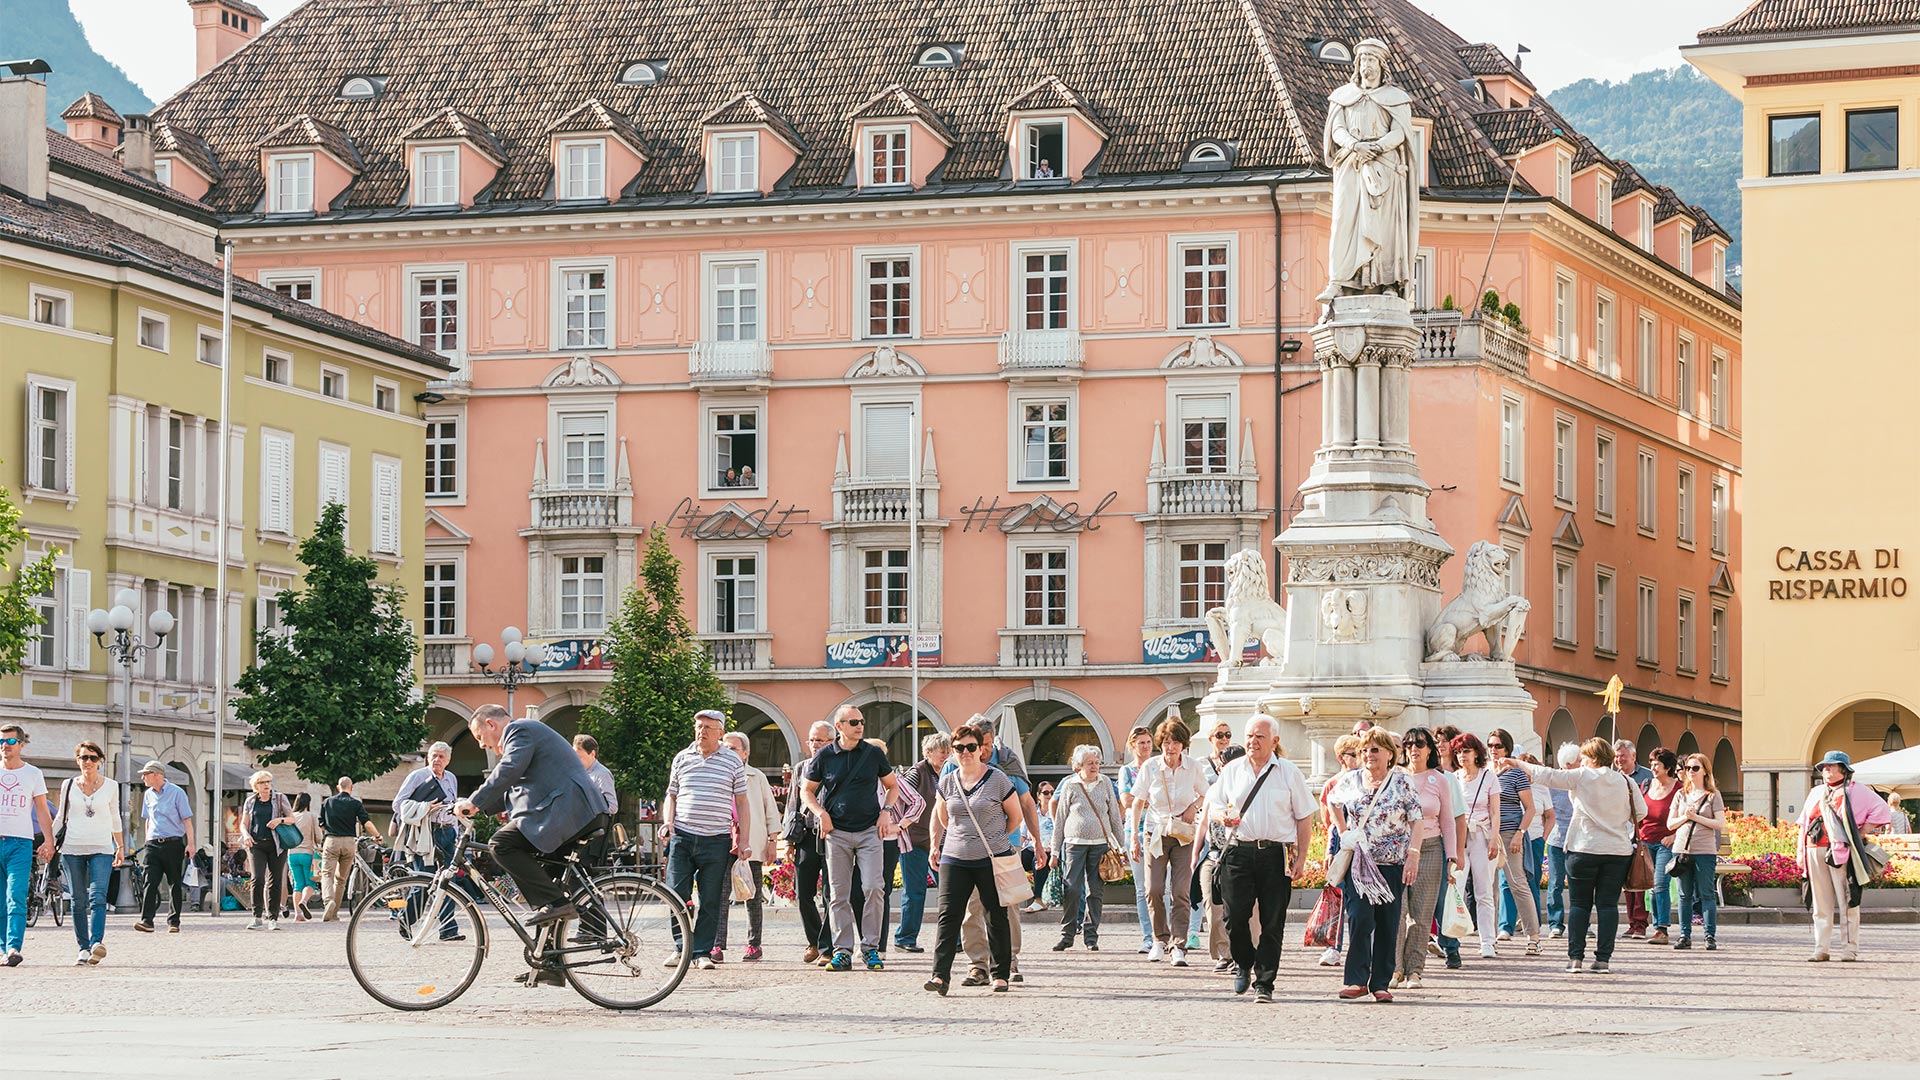 Photograph of the crowds of citizens moving, both on foot and by bike, around Piazza Walther on a sunny day.